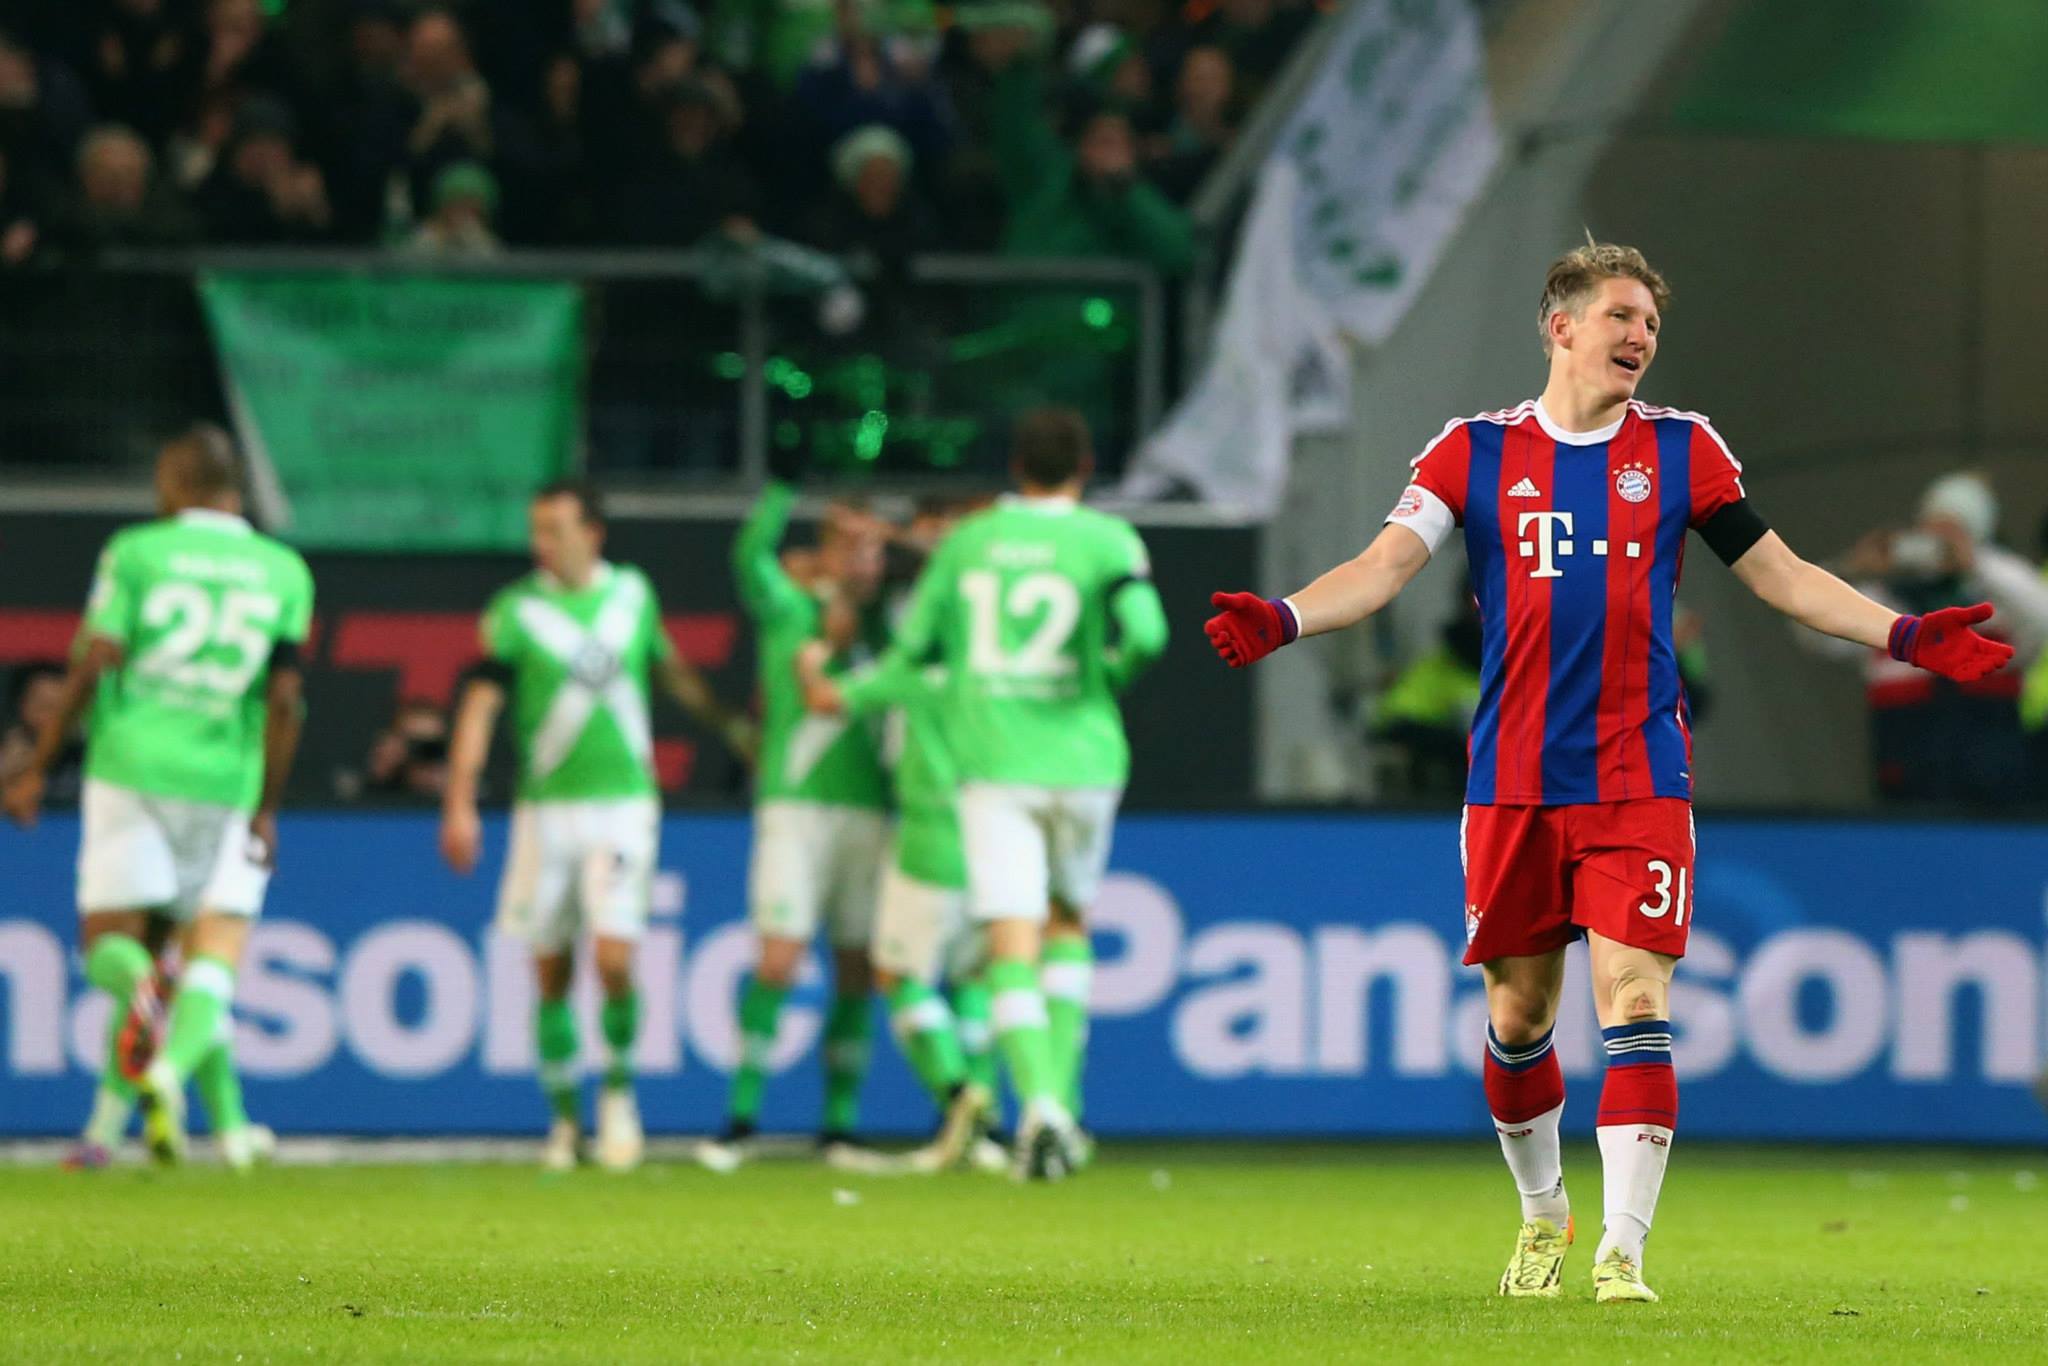 Bayern have themselves to blame for the mistakes against Wolfsburg